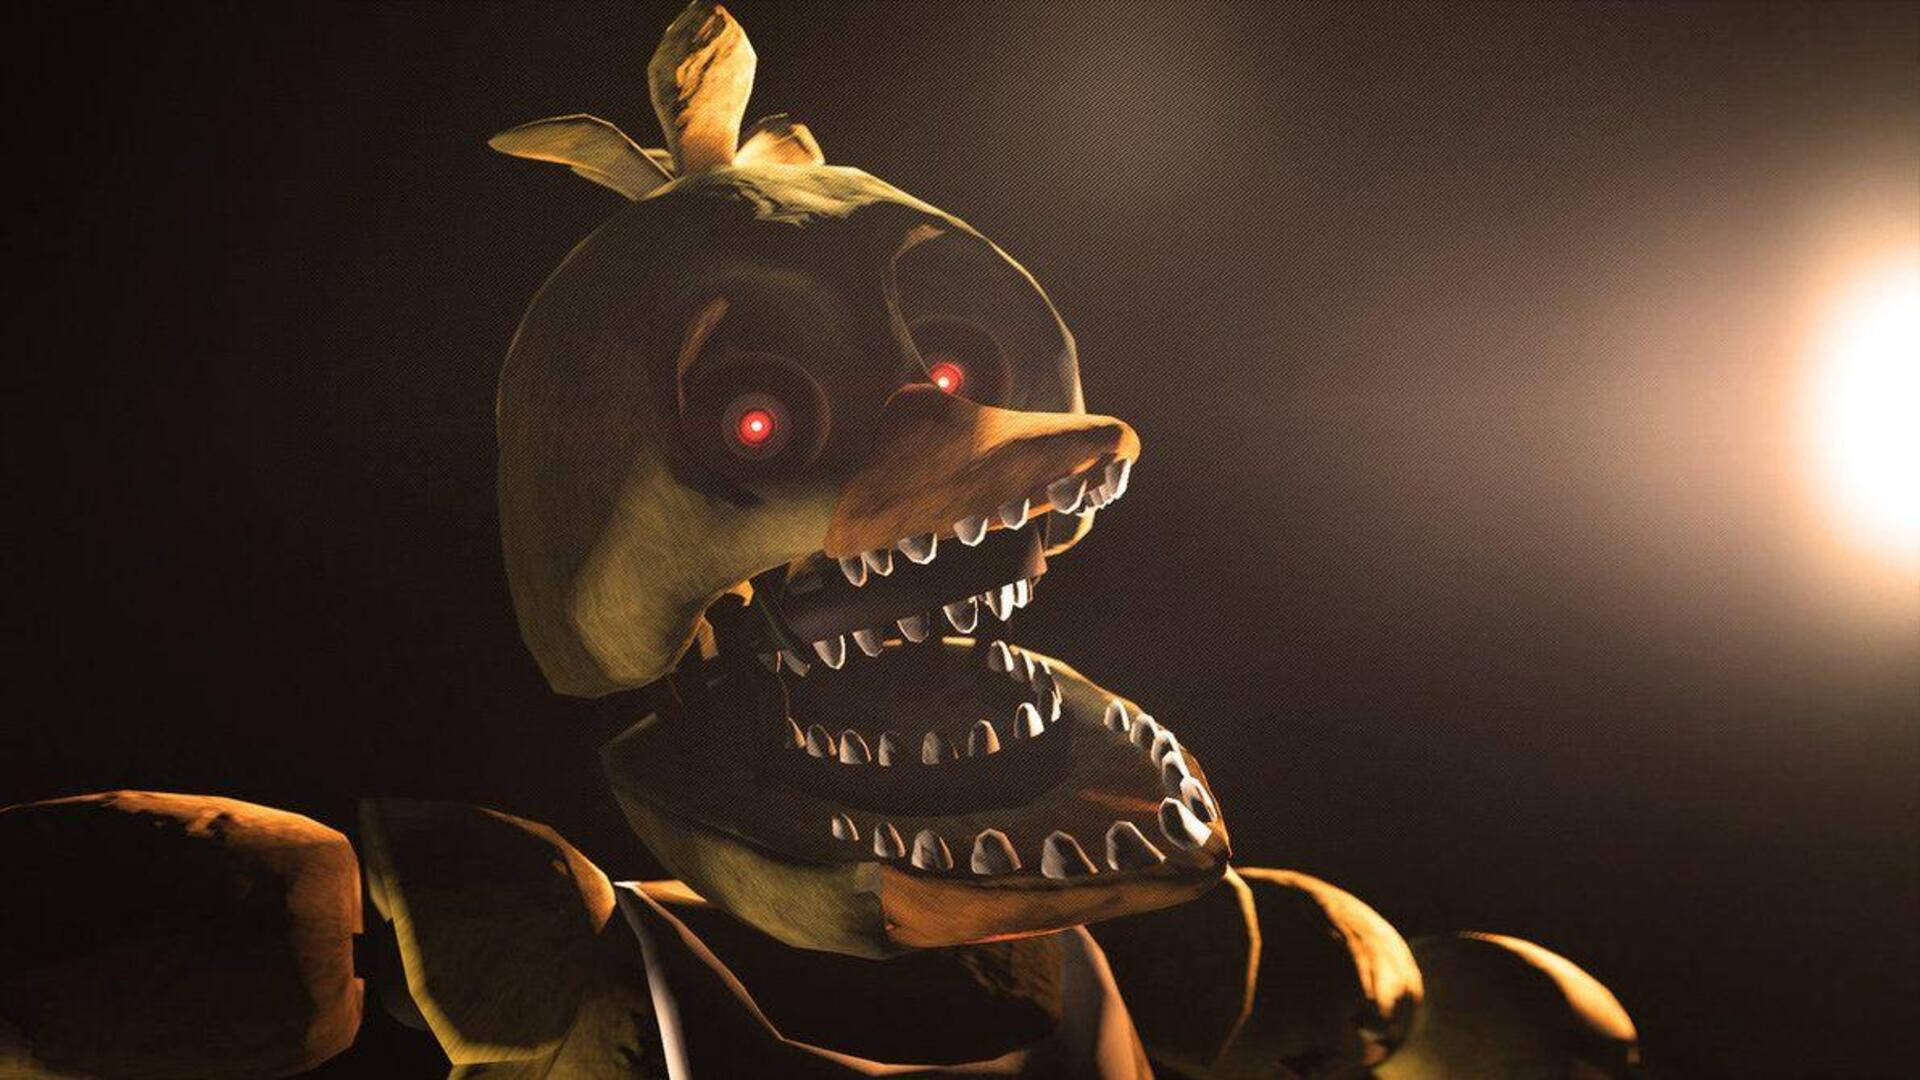 withered chica | Sticker